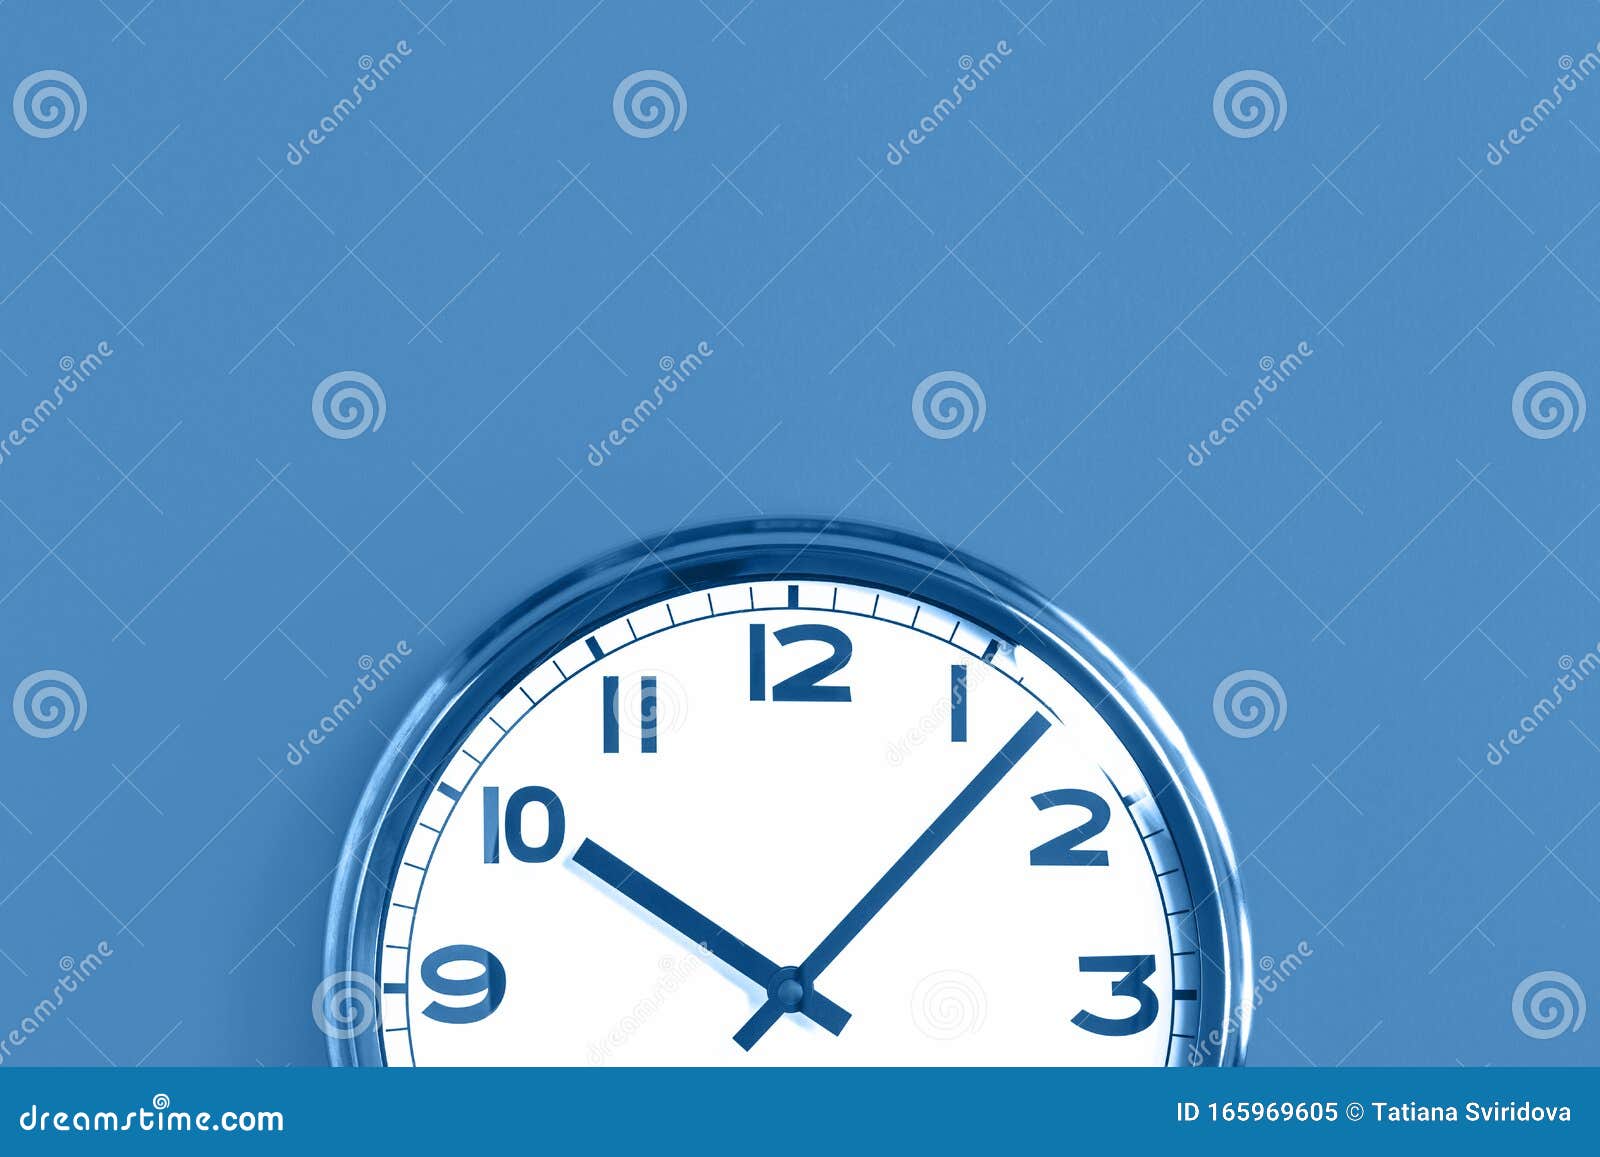 Top Half of Big Wall Clock on Blue Background Stock Image - Image of  change, arrow: 165969605